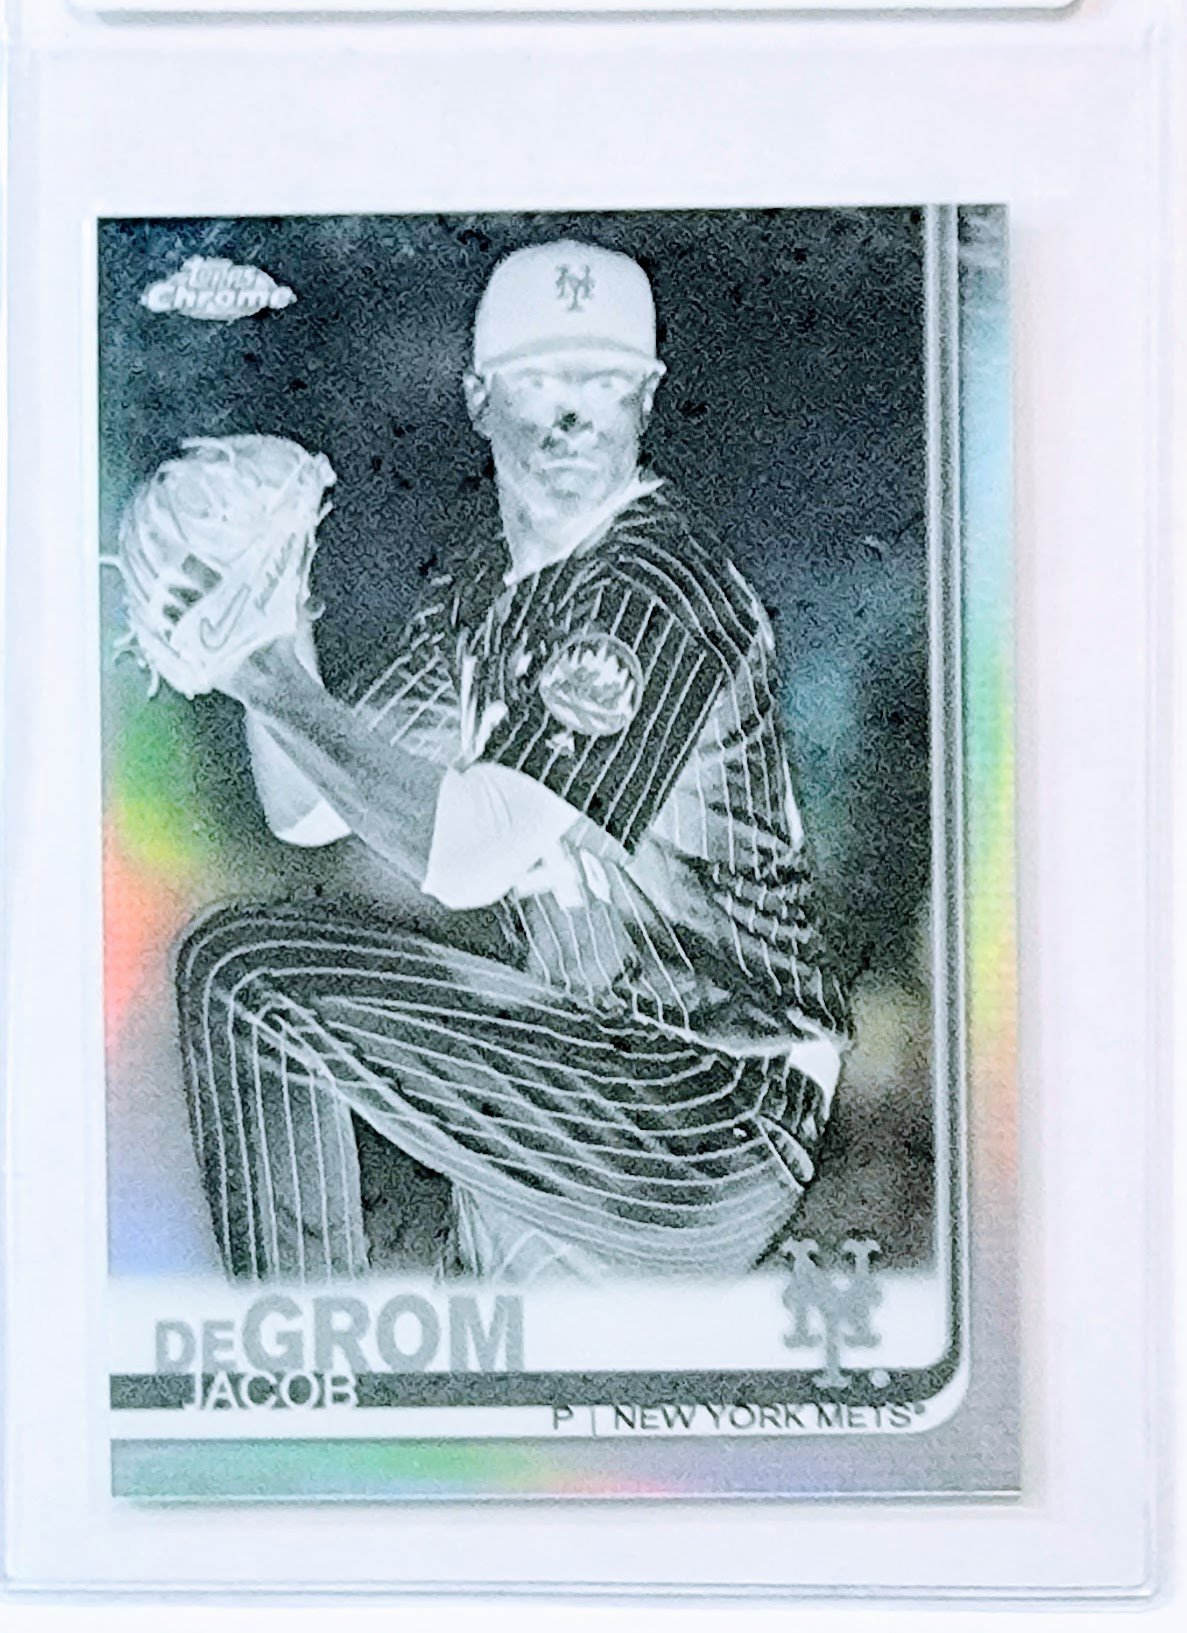 2019 Topps Chrome Jacob DeGrom Negative Refractor Baseball Trading Card TPTV simple Xclusive Collectibles   